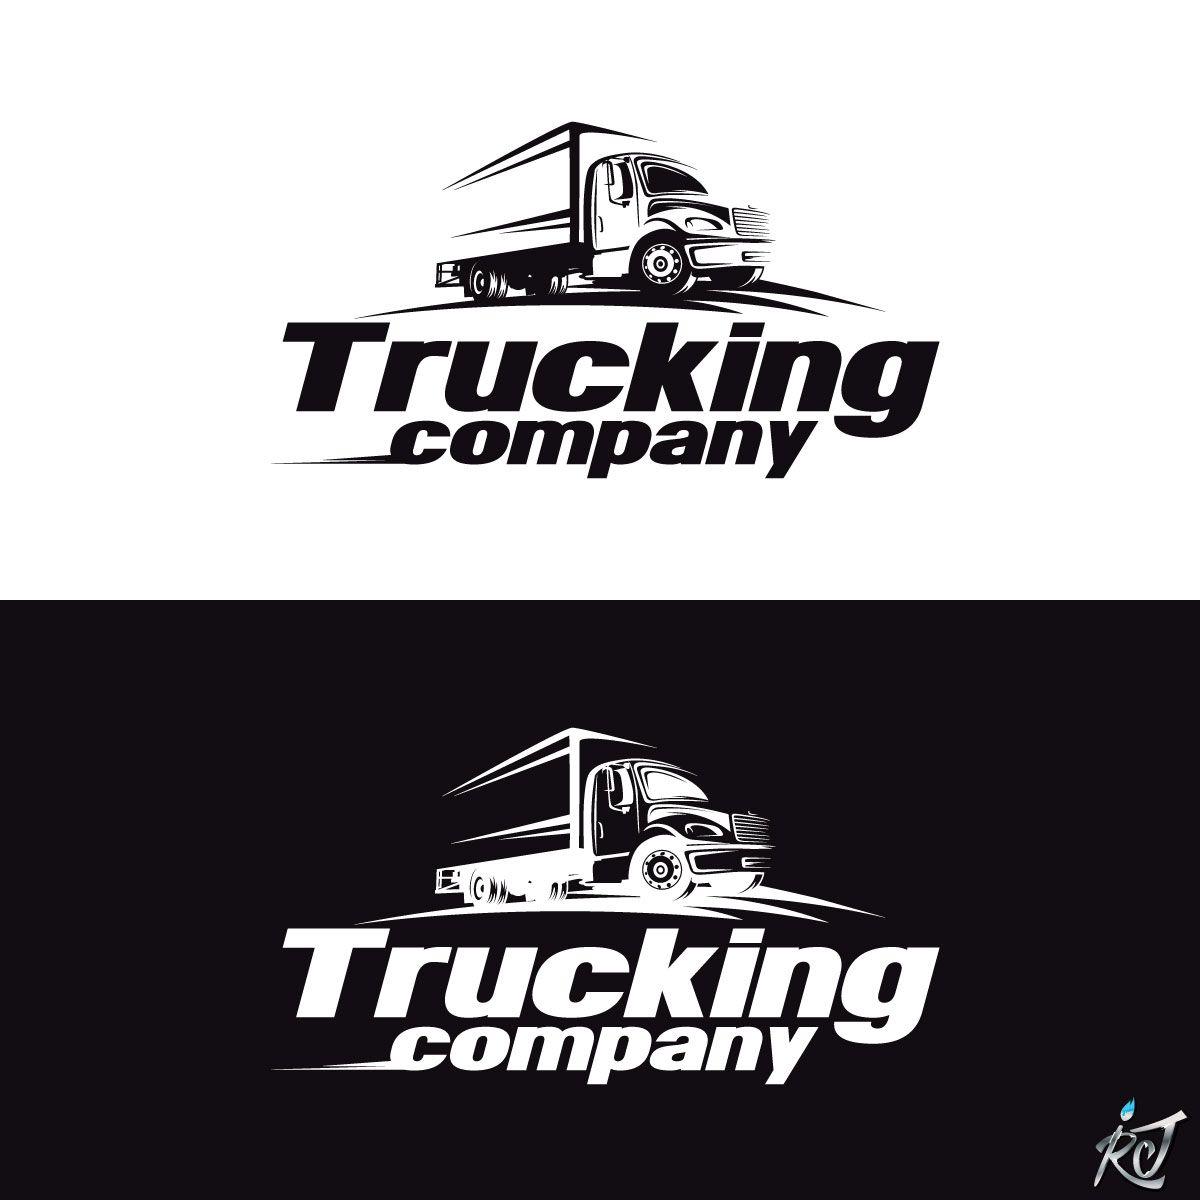 Trucking Company Logo - Bold, Serious, Trucking Company Logo Design for Open To all ideas by ...